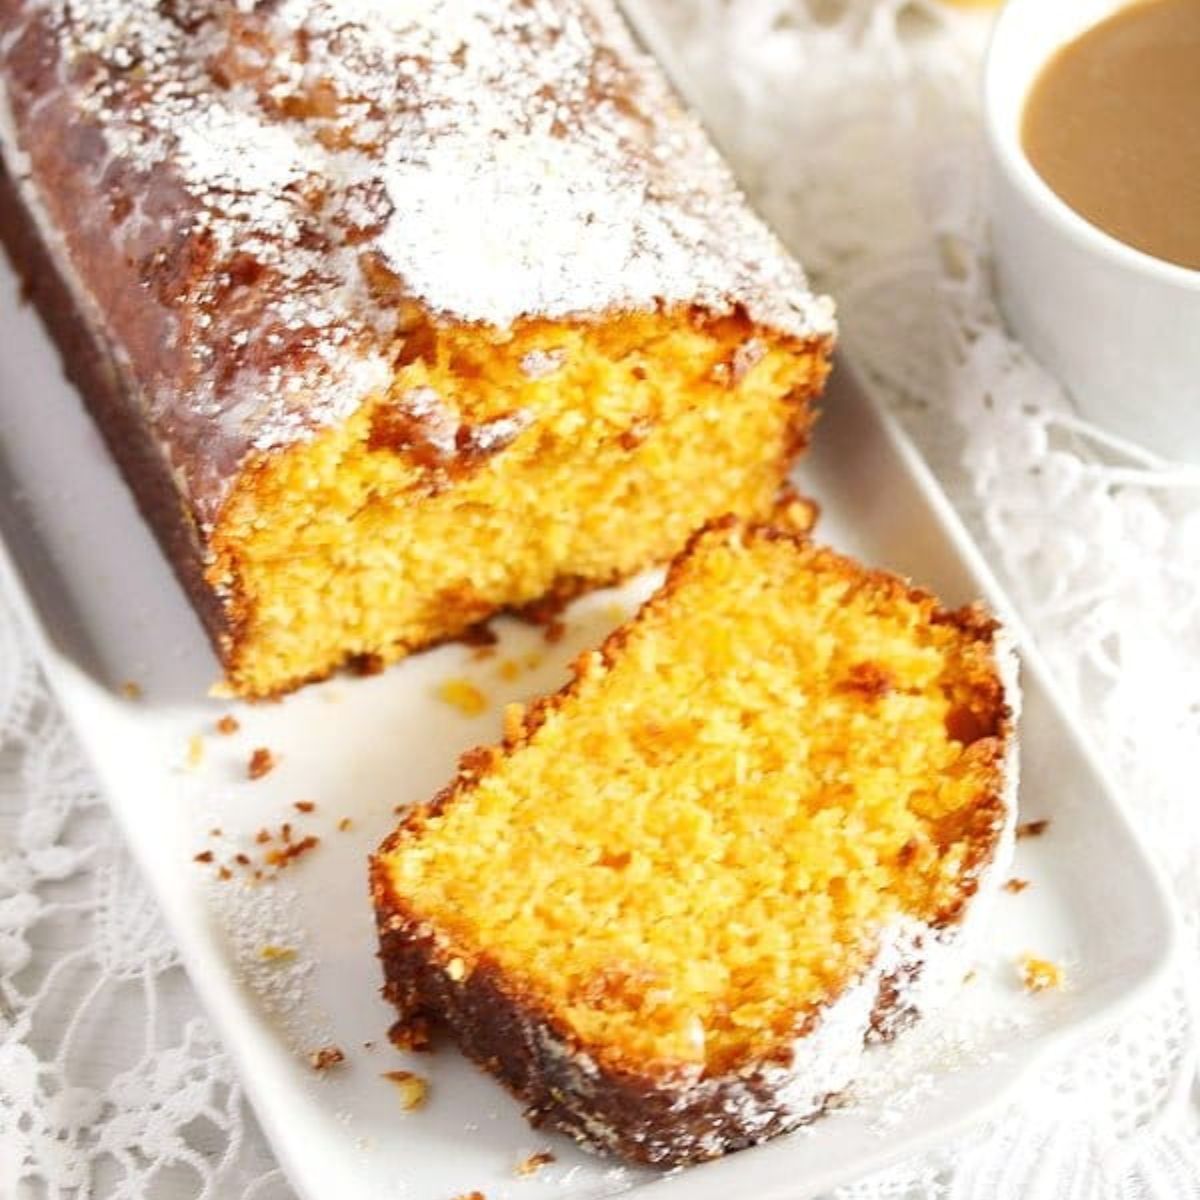 sliced carrot and coconut cake sprinkled with powdered sugar and a cup of tea.